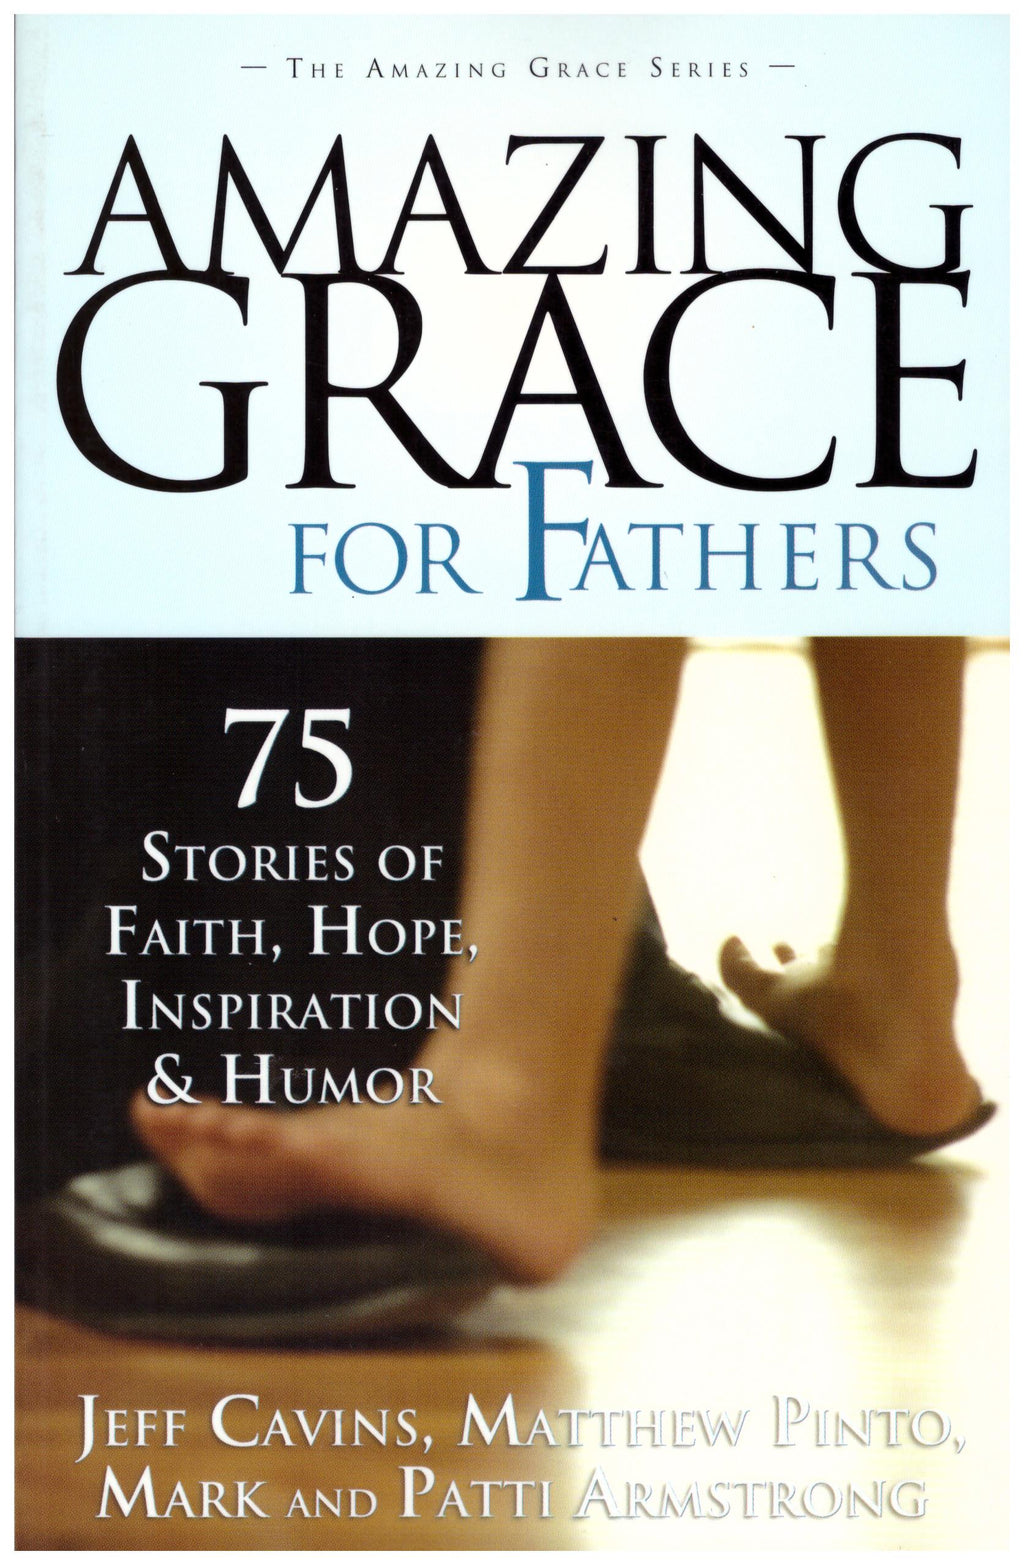 AMAZING GRACE FOR FATHERS